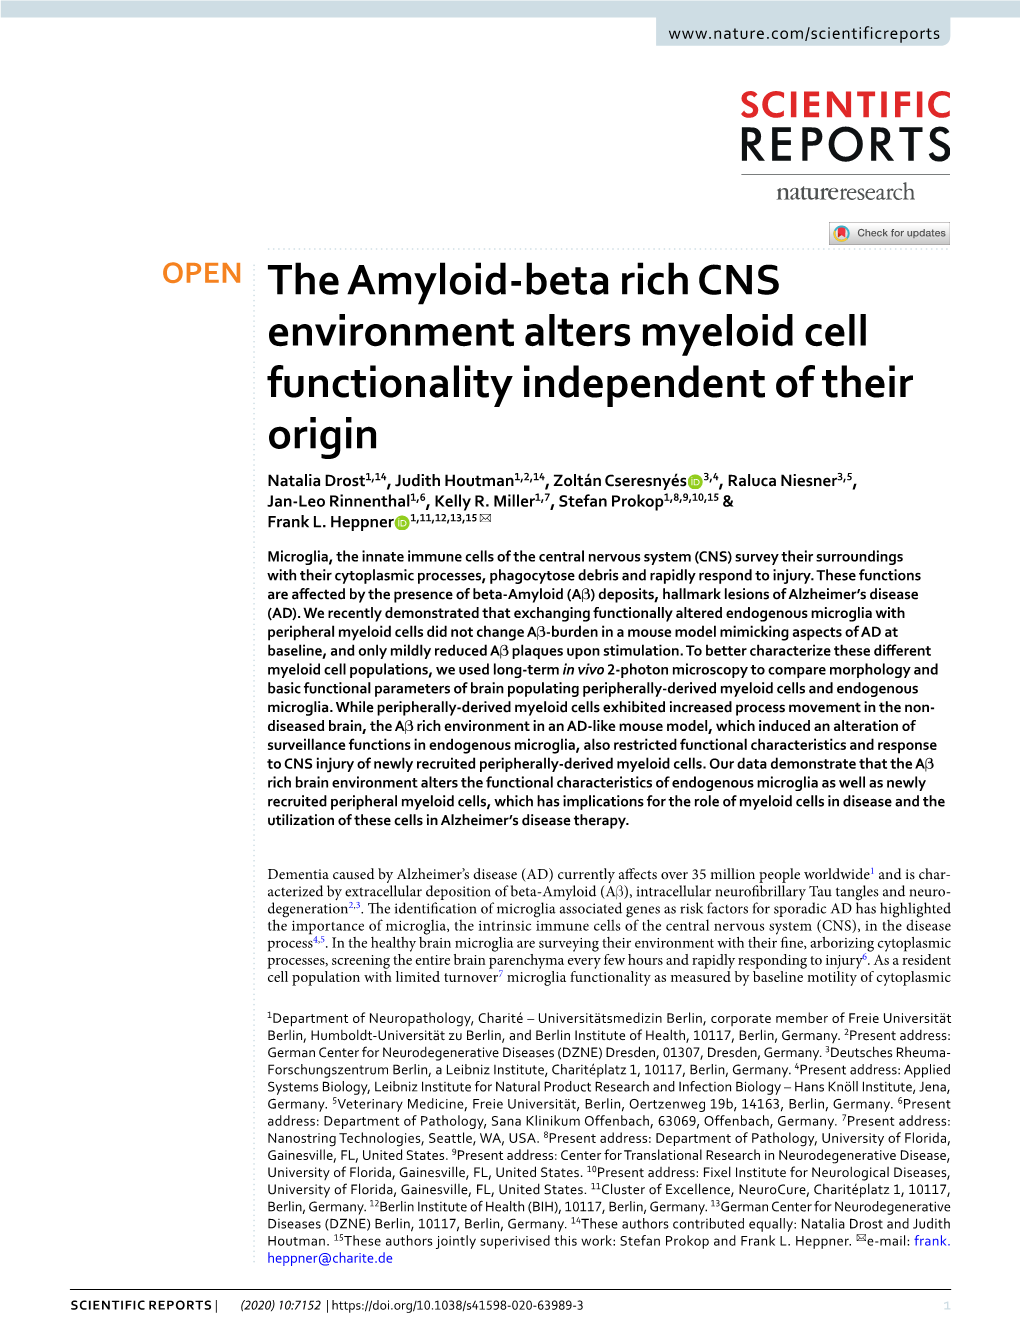 The Amyloid-Beta Rich CNS Environment Alters Myeloid Cell Functionality Independent of Their Origin